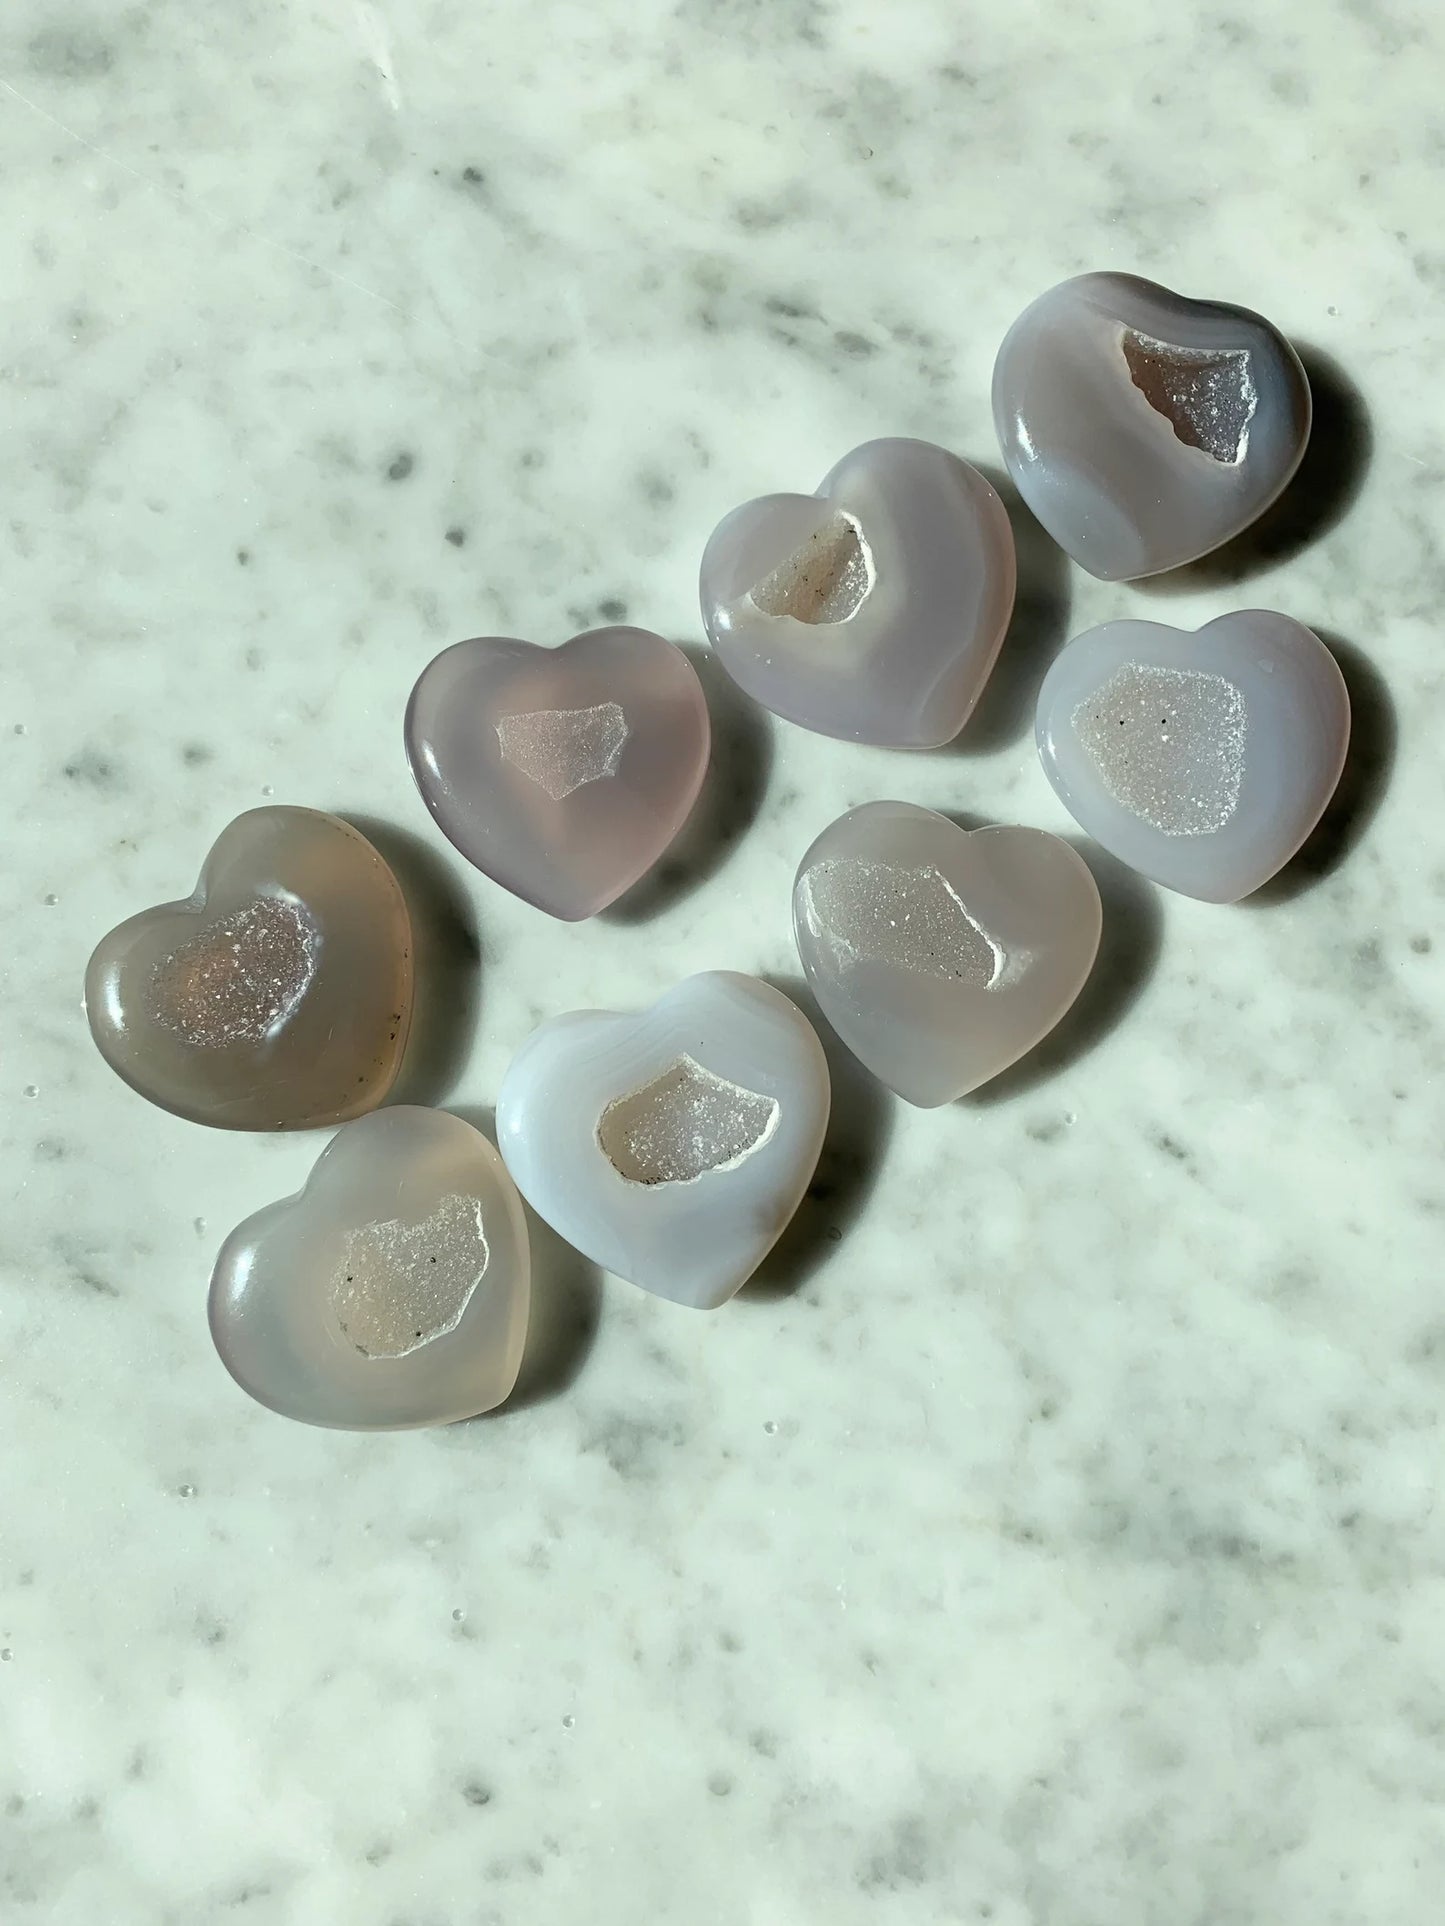 Druzy Agate Hearts, Small and Large